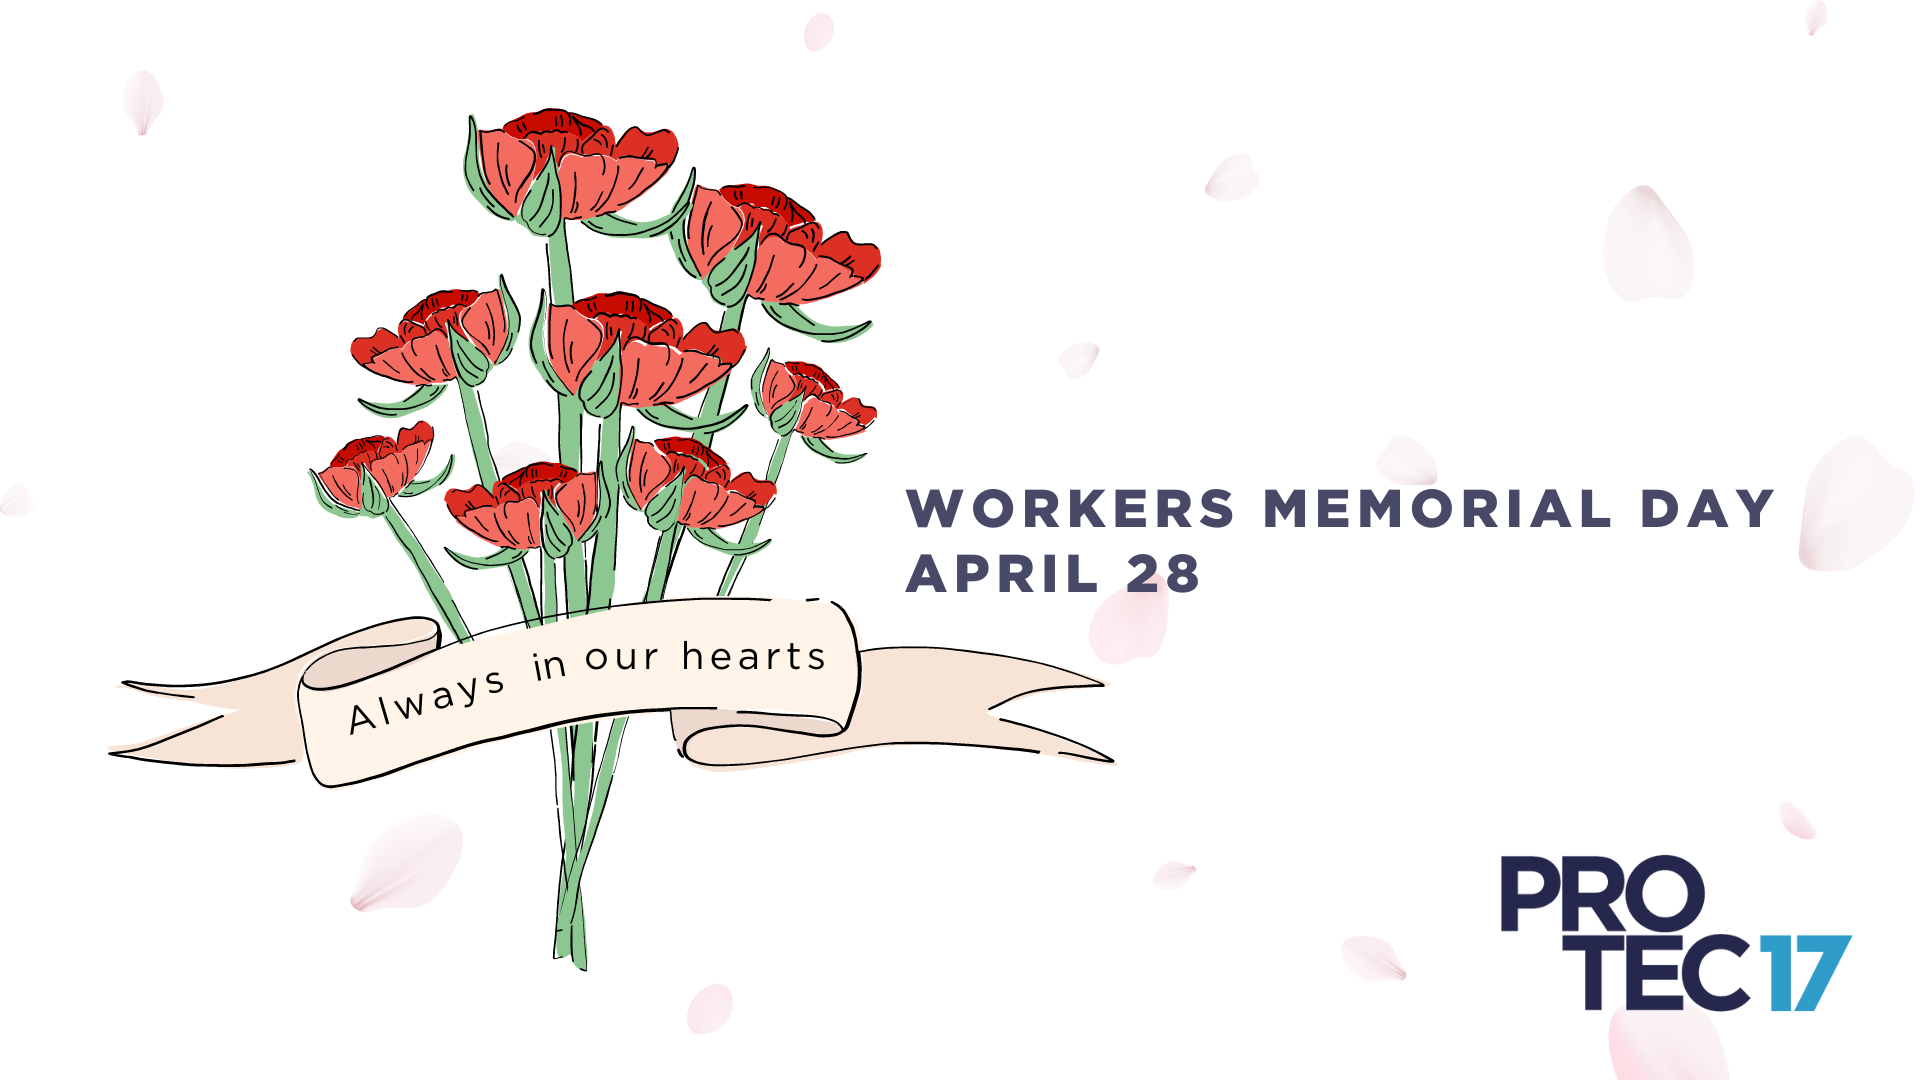 Text reads, "Always in our hearts" across a ribbon banner that is placed over a bouquet of roses. The text at the bottom reads, "WORKERS MEMORIAL DAY APRIL 28." The PROTEC17 logo is in the bottom right.